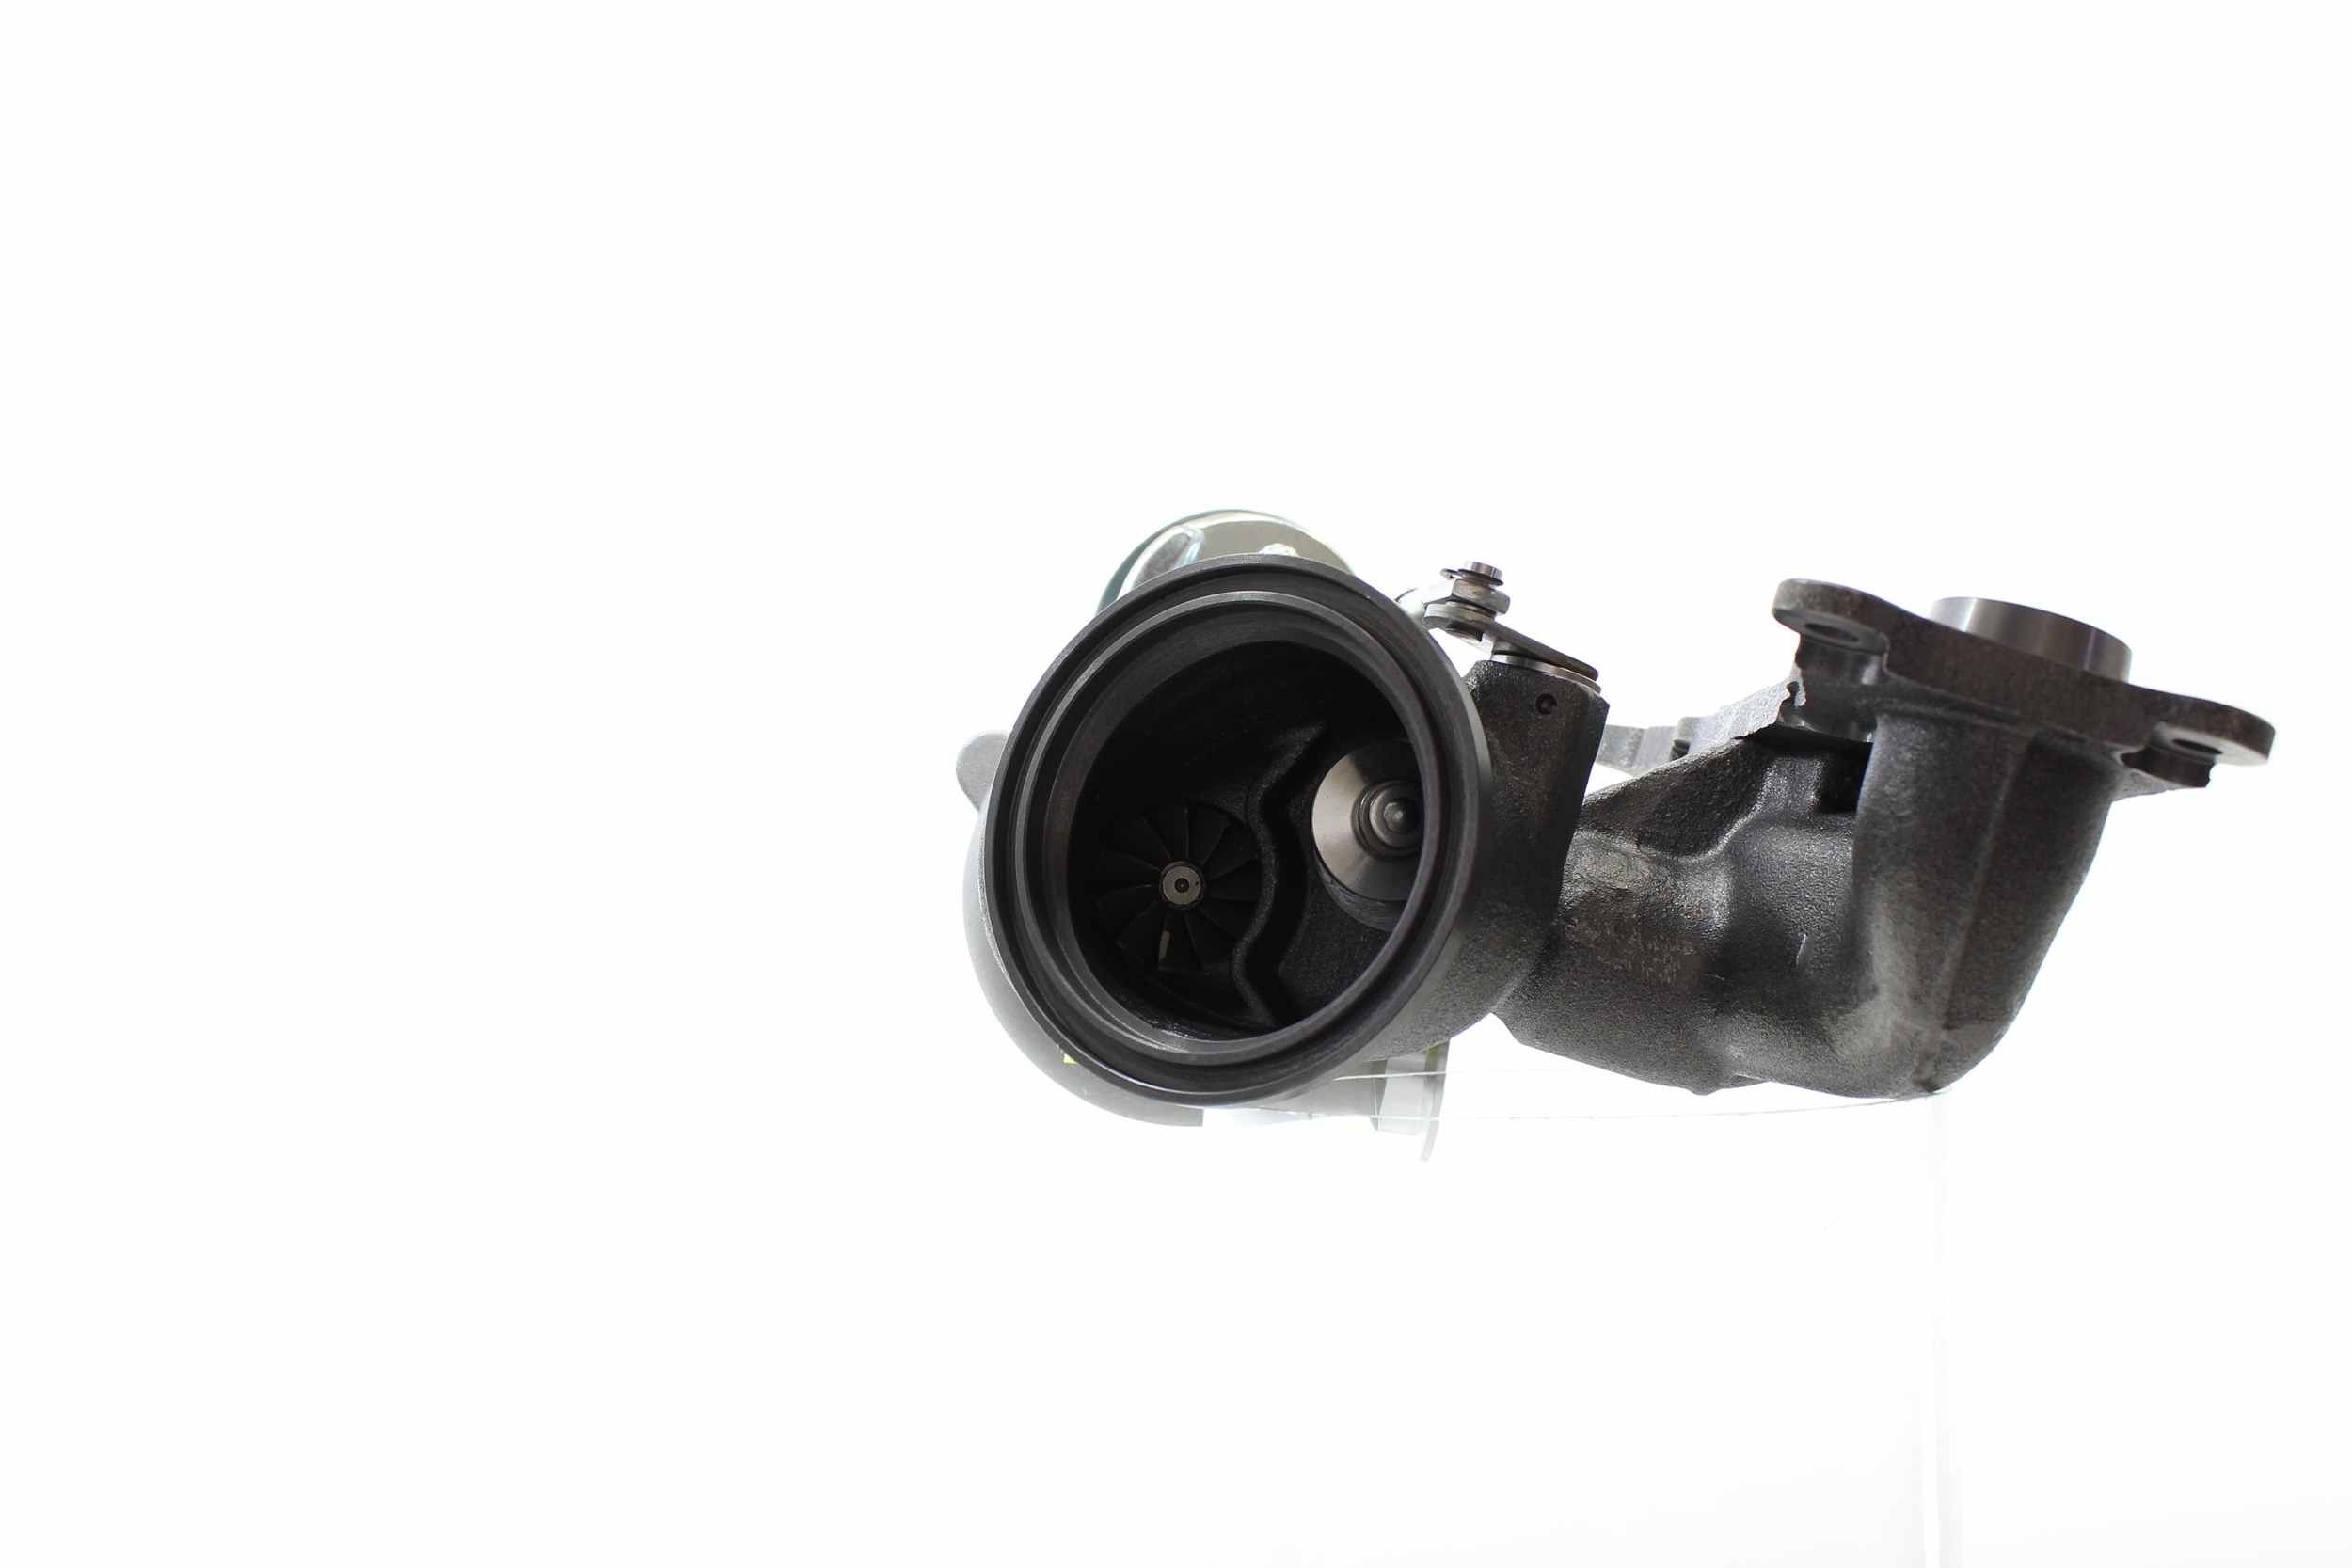 ALANKO 900544 Turbo Exhaust Turbocharger, Engine, Incl. Gasket Set, with attachment material